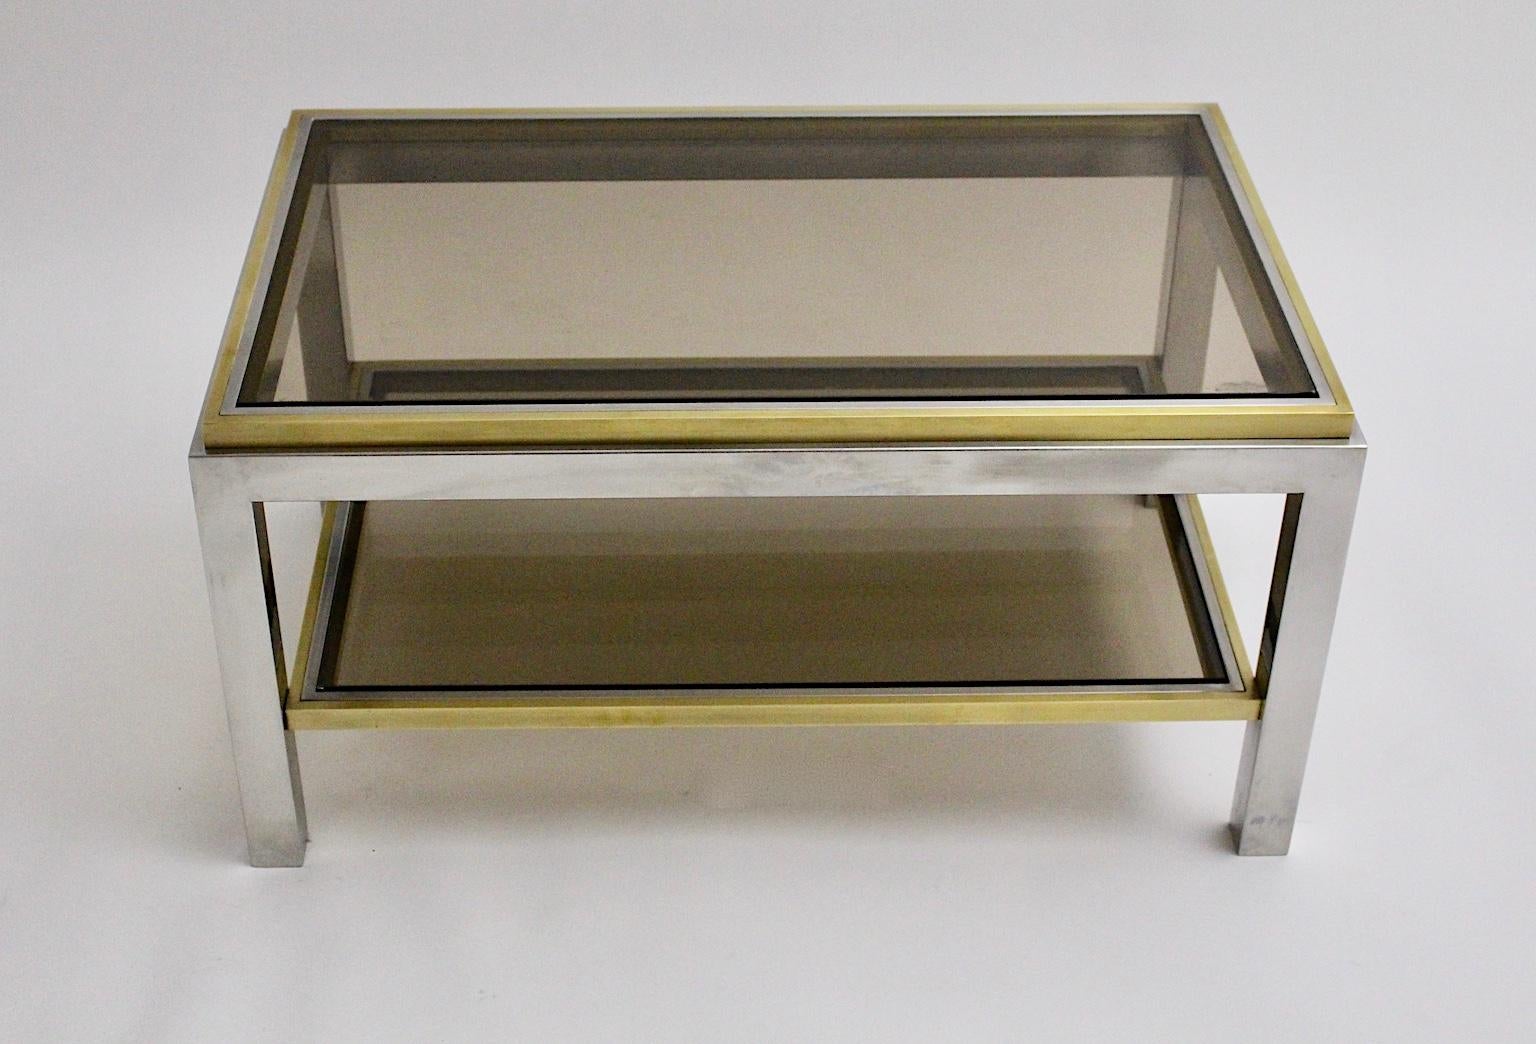 Metal Mid-Century Modern Brass Chrome Coffee Table by Willy Rizzo Signed 1970s Italy For Sale